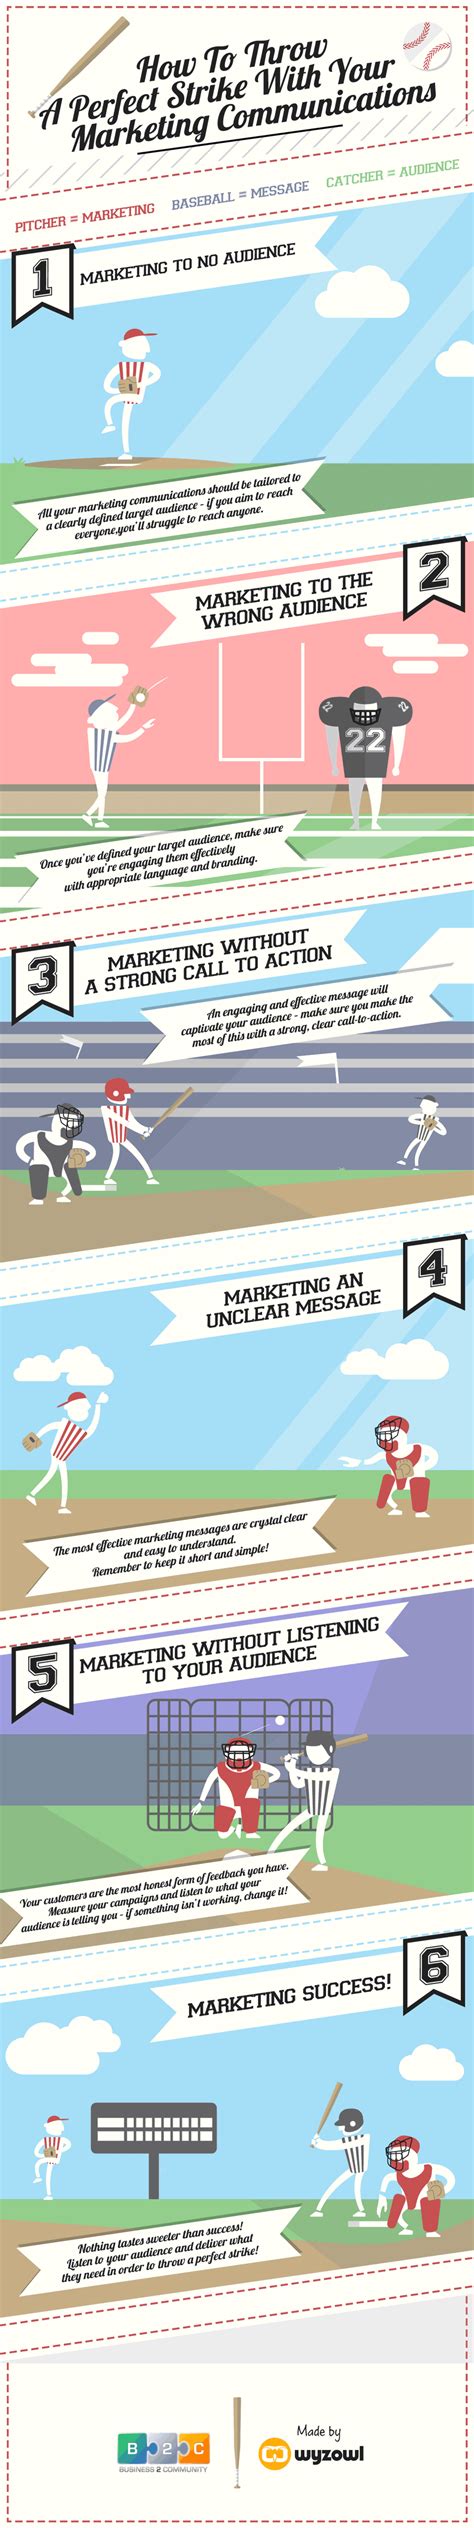 How To Throw A Perfect Strike With Your #Marketing #Communications - #Infographic Marketing ...